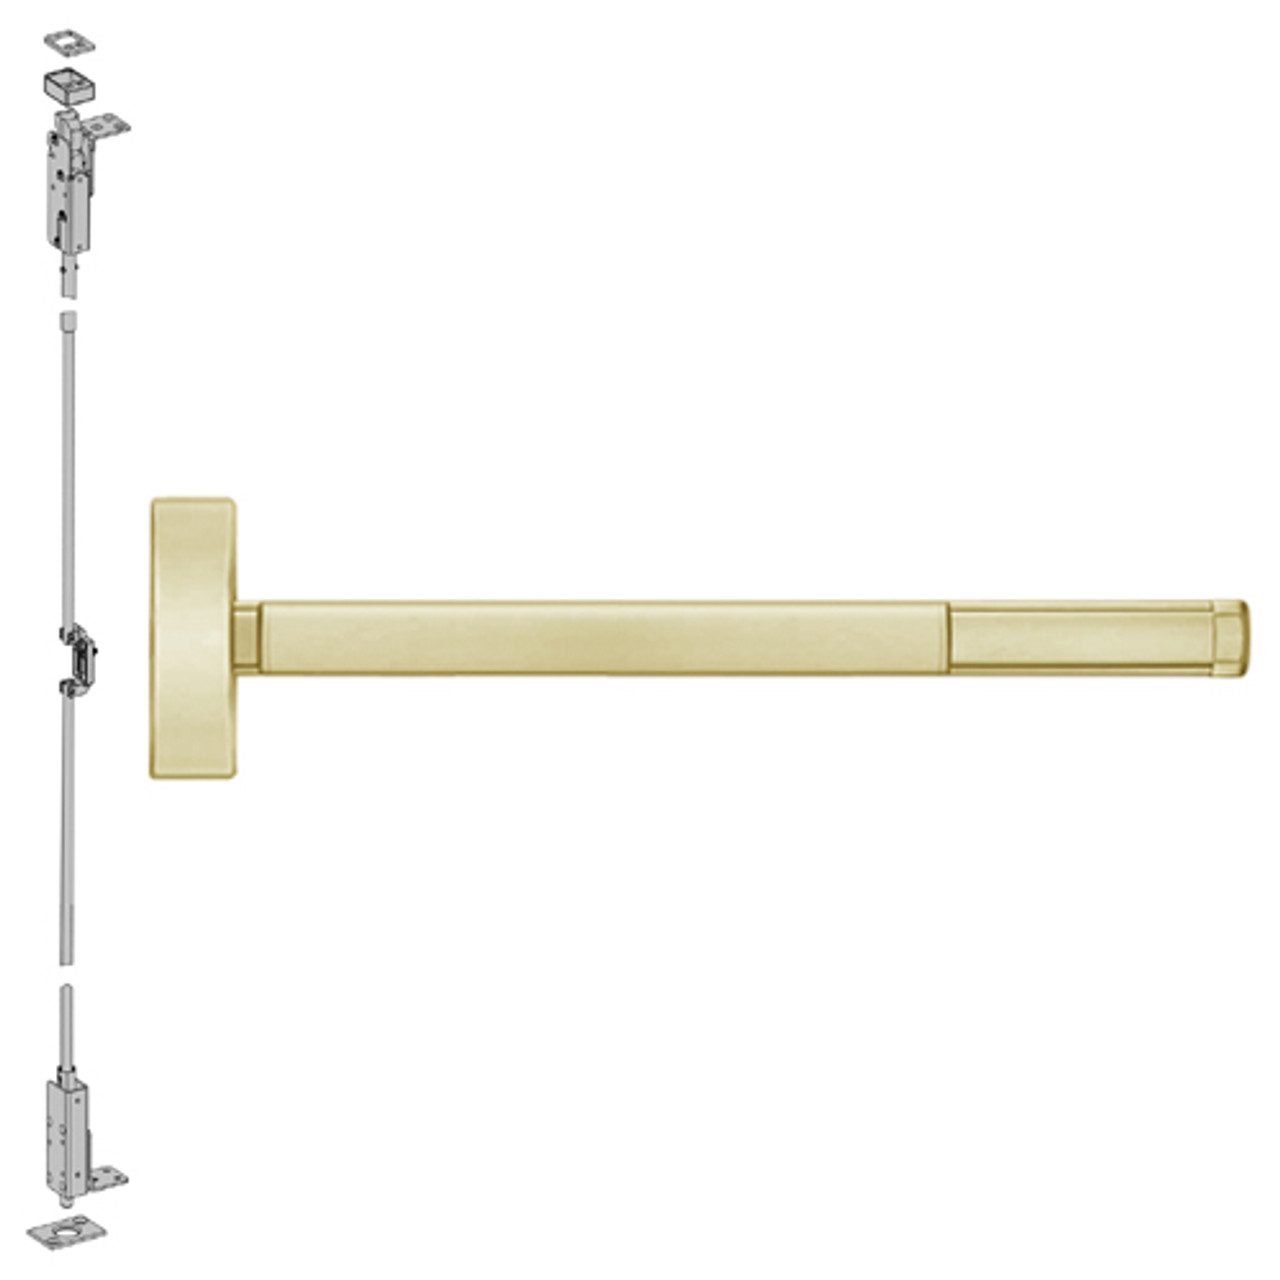 ELR2715LBR-606-48 PHI 2700 Series Wood Door Concealed Vertical Exit Device with Electric Latch Retraction Prepped for Thumbpiece Always Active in Satin Brass Finish